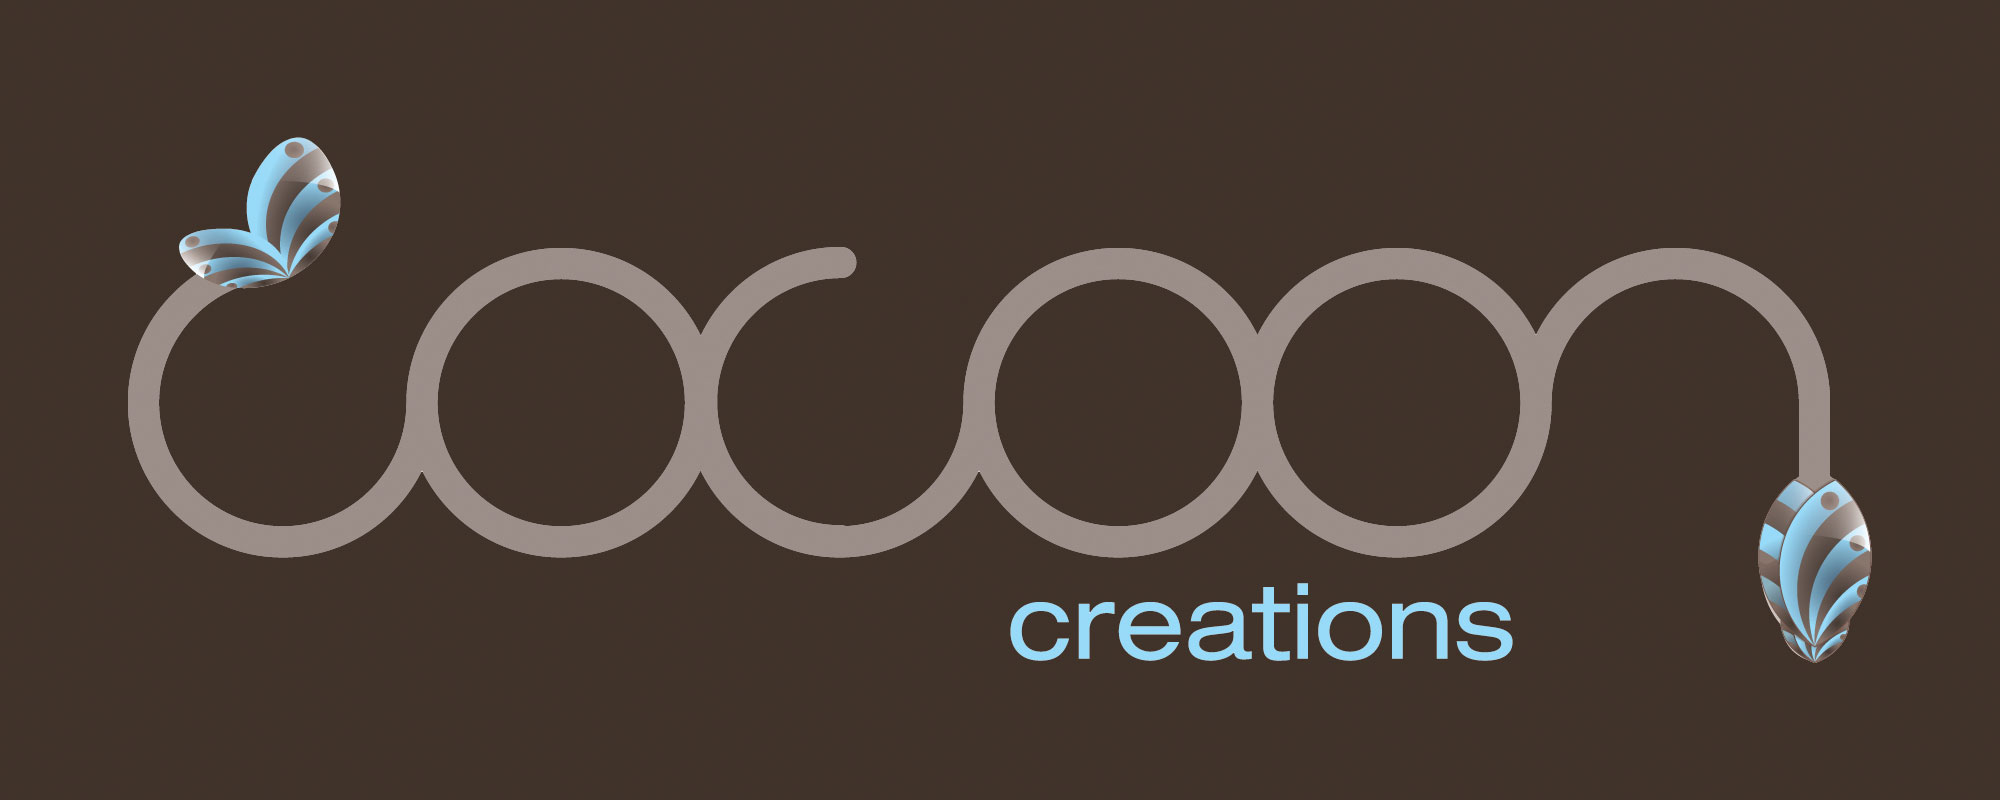 cocoon-creations